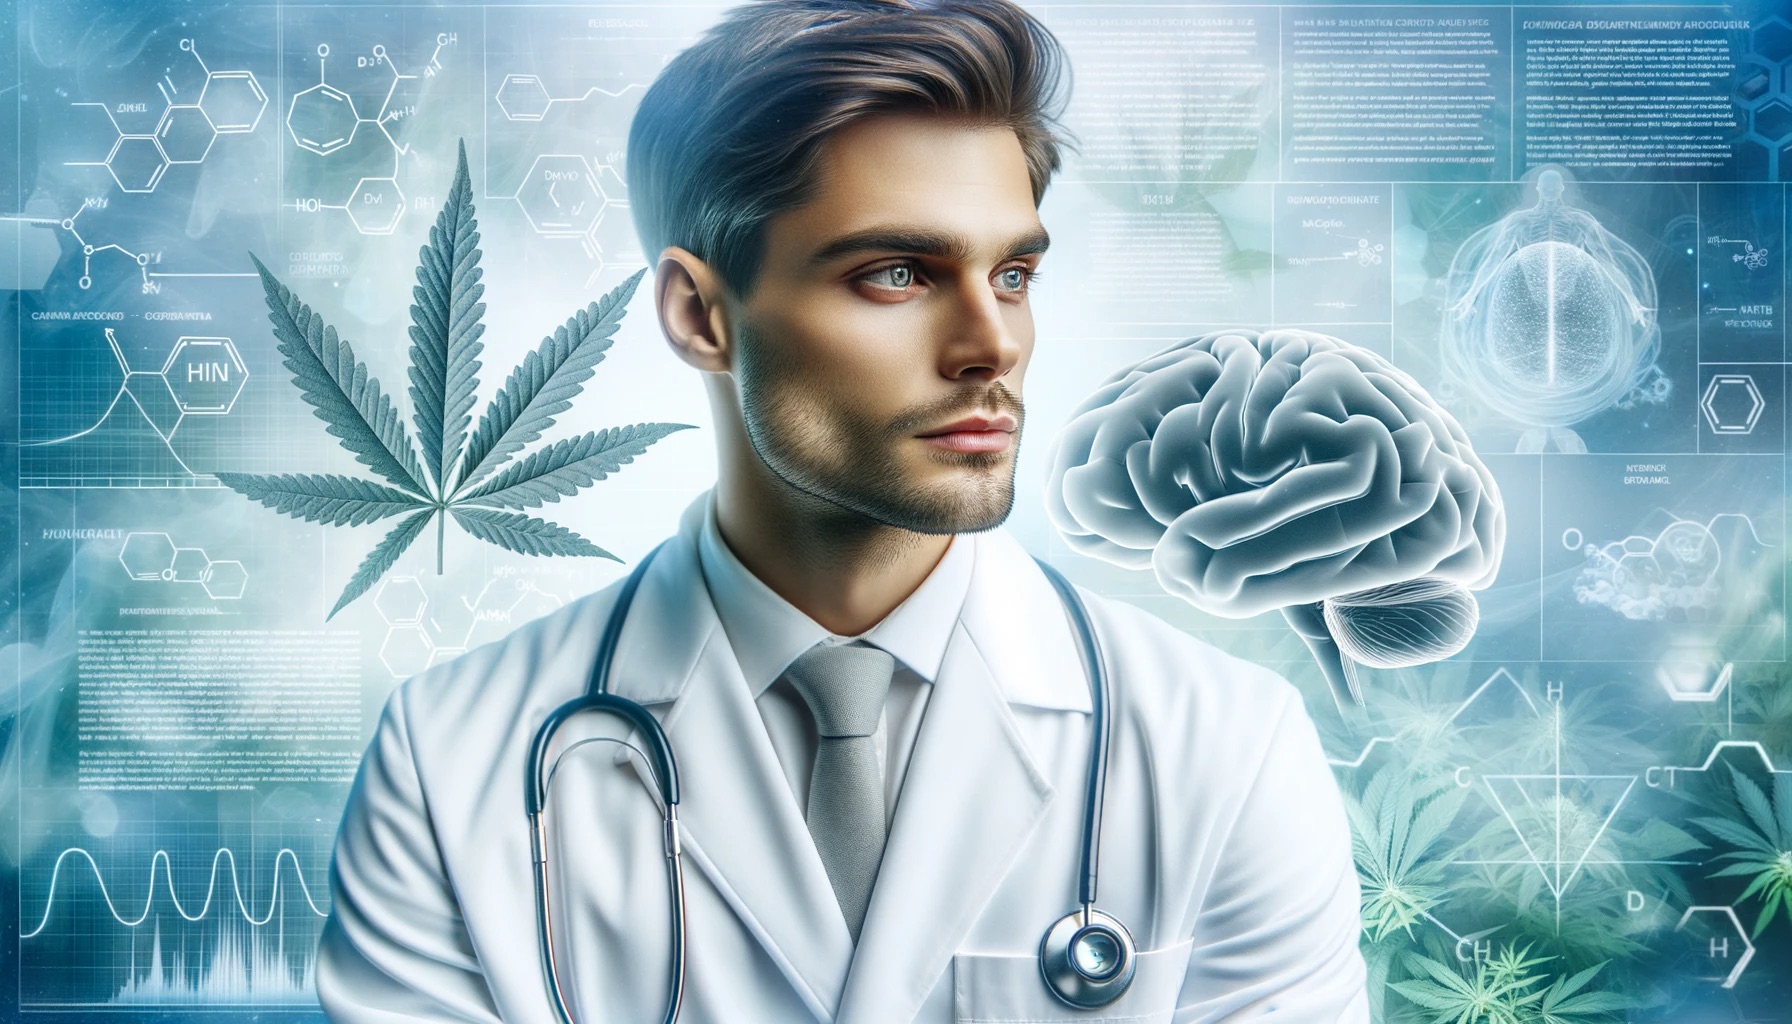 Physician in white coat contemplating the complex relationship between cannabis and mental health, surrounded by symbols of science and wellness.